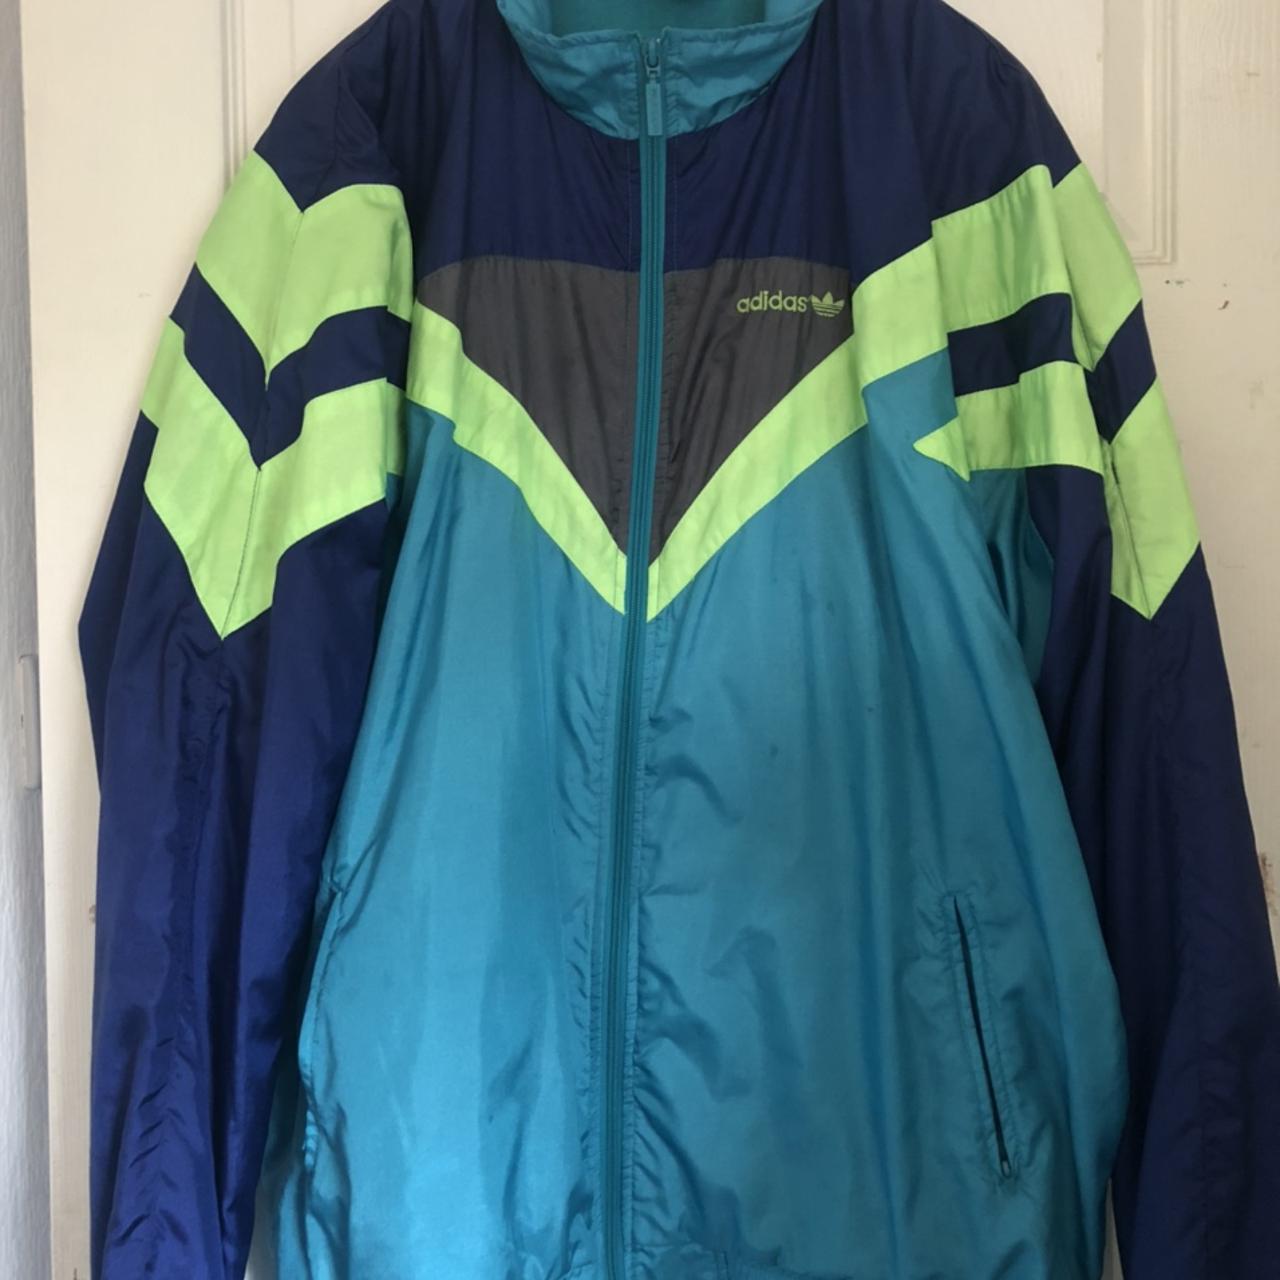 DISCOUNTED: Vintage neon adidas D8 F192 jacket, size... - Depop